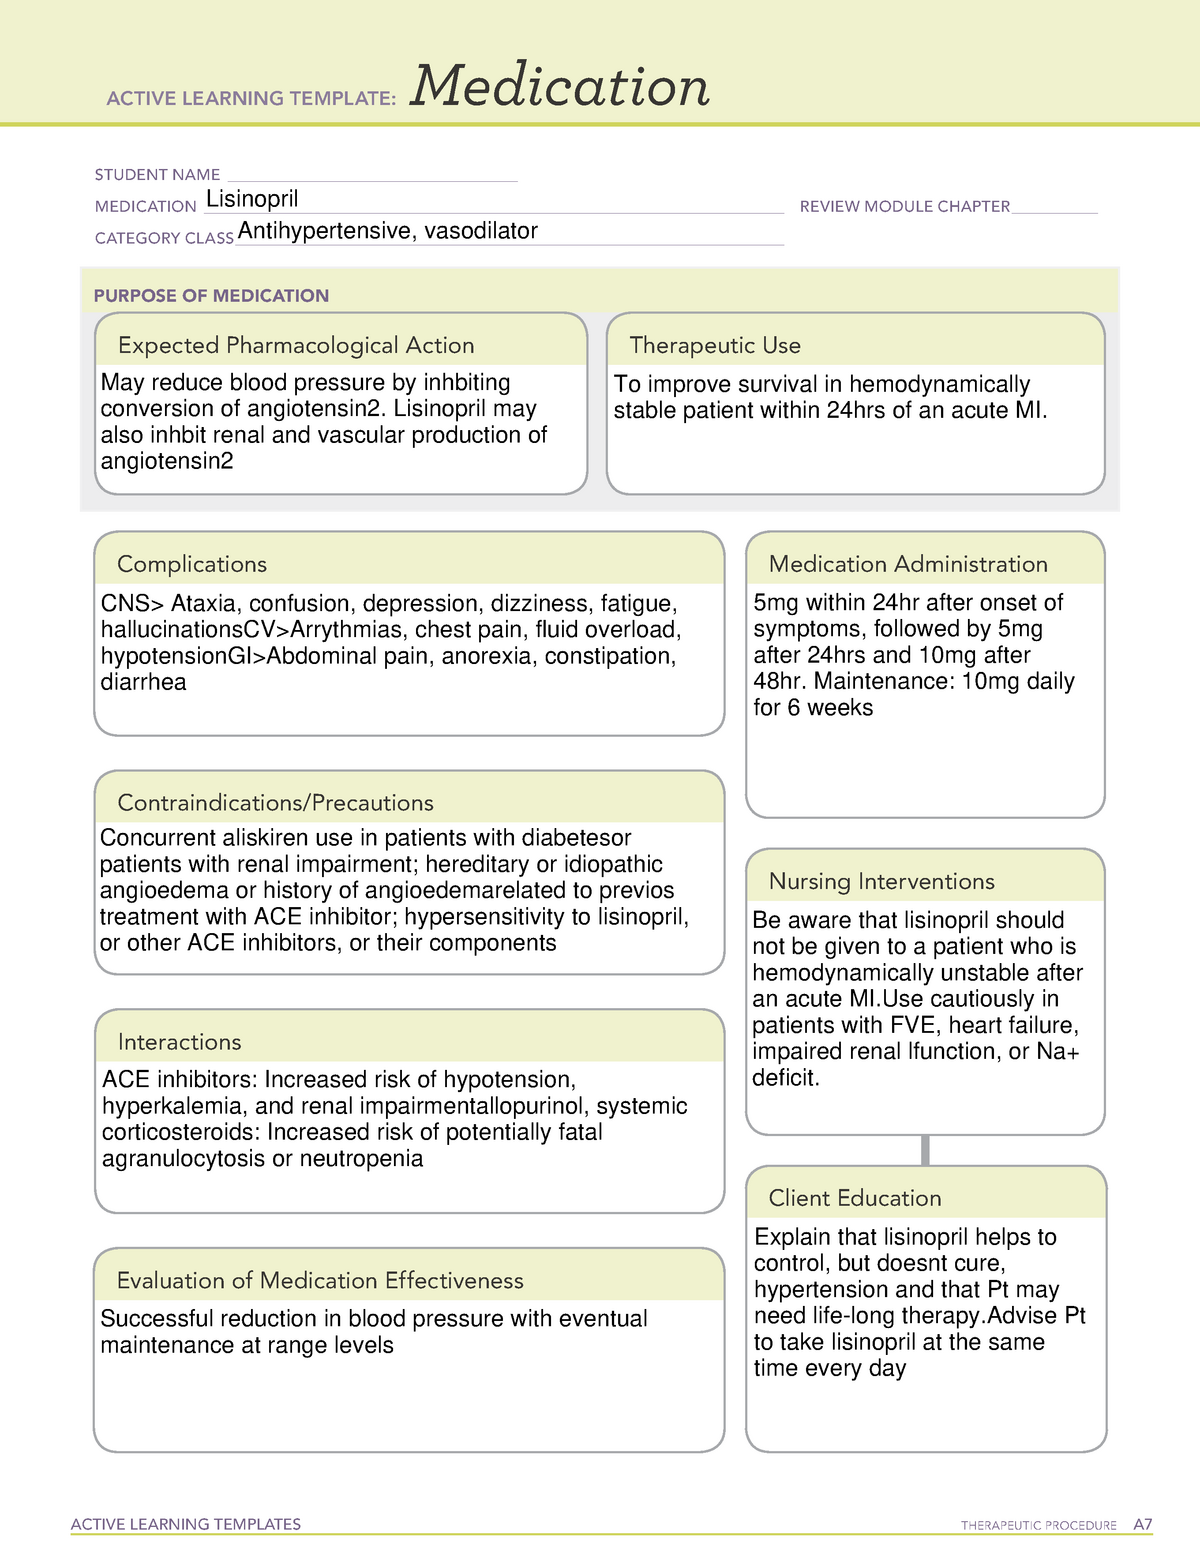 alt-medication-lisinopril-medication-template-and-report-active-learning-templates-therapeutic